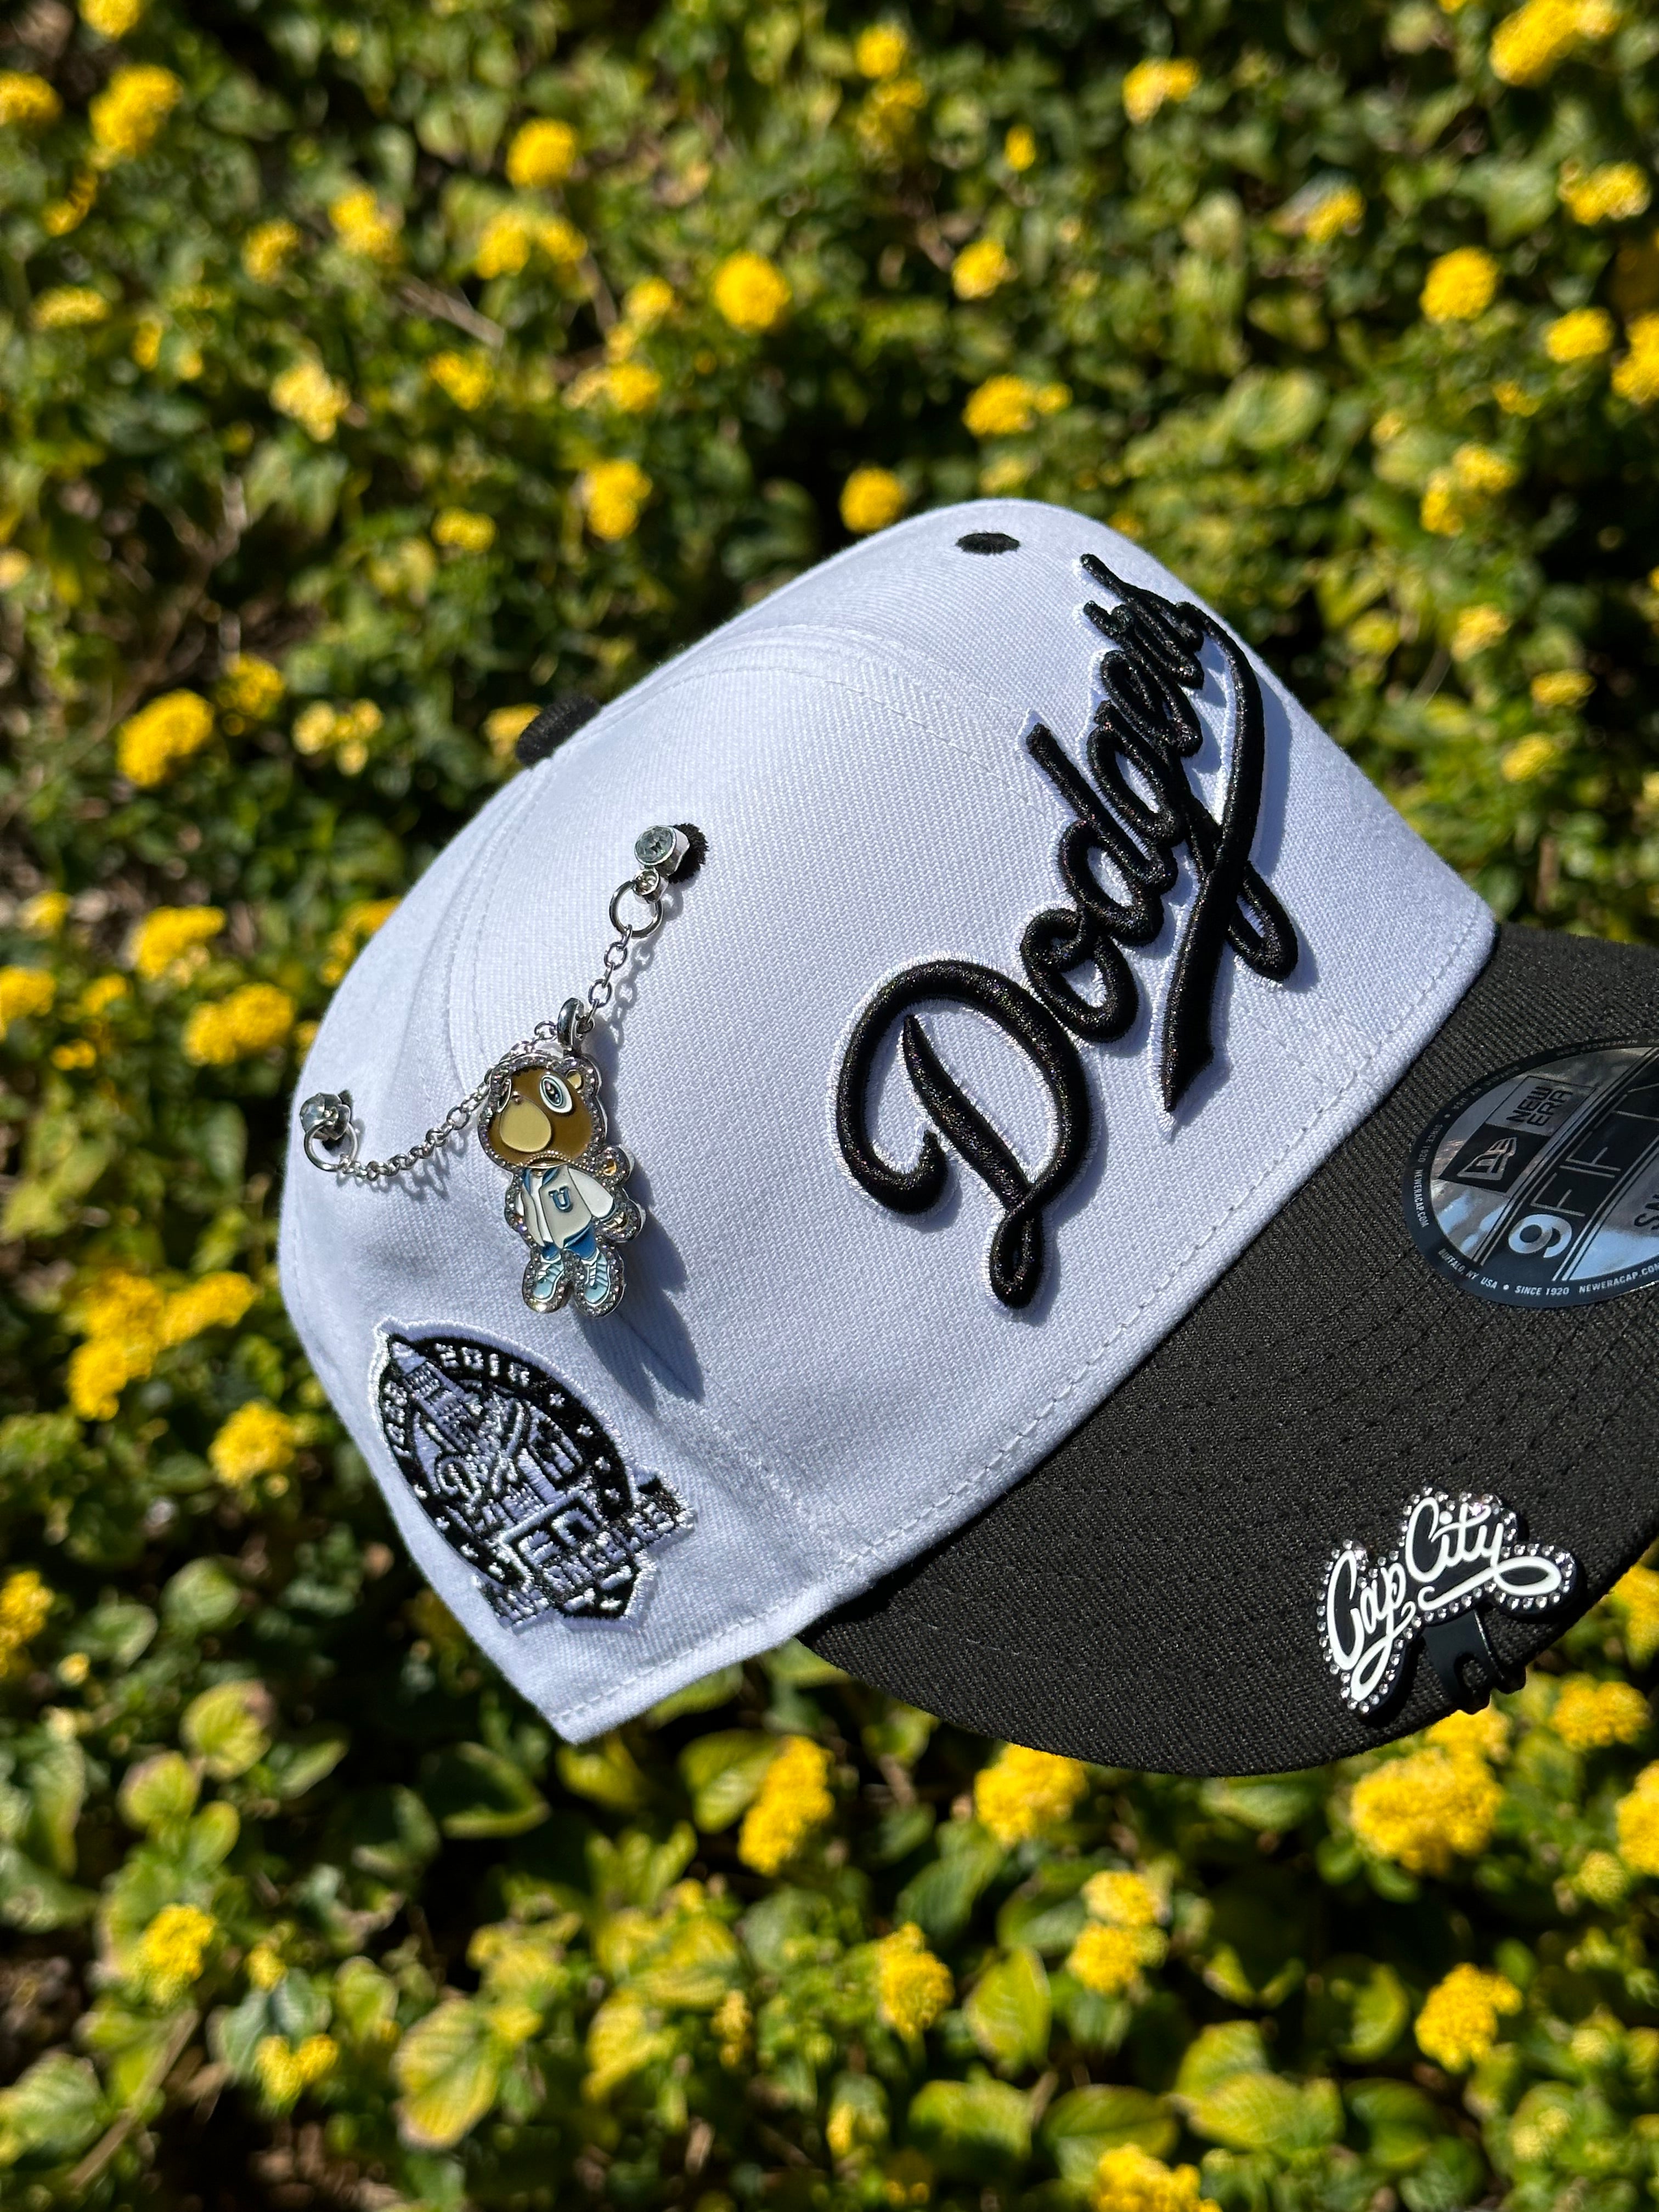 NEW ERA EXCLUSIVE 9FIFTY WHITE/BLACK LOS ANGELES DODGERS SCRIPT SNAPBACK W/ 60TH ANNIVERSARY PATCH